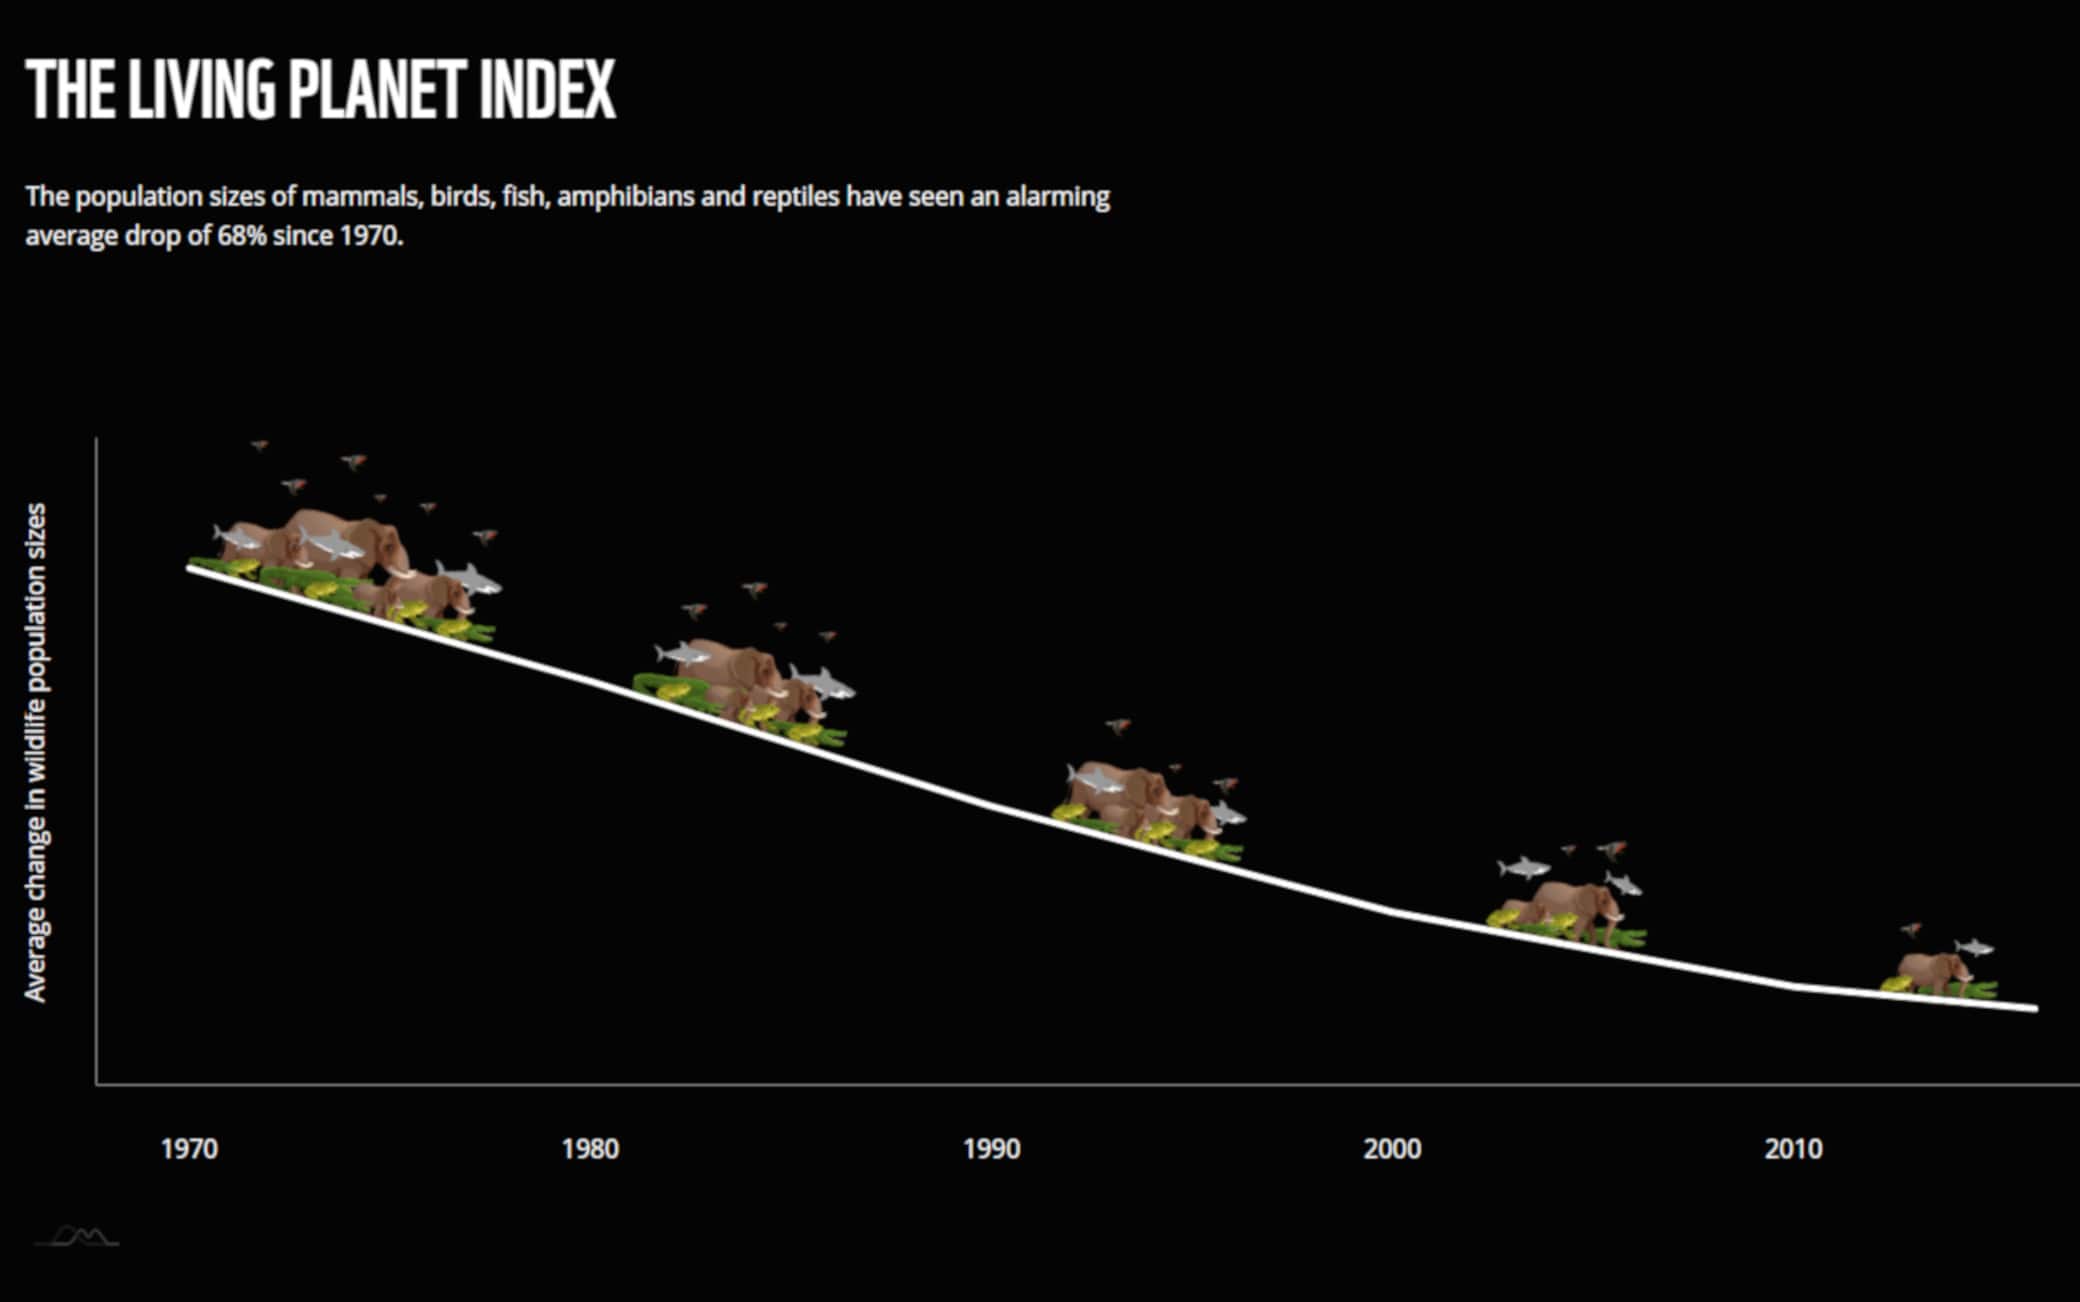 Wwf, The living planet index